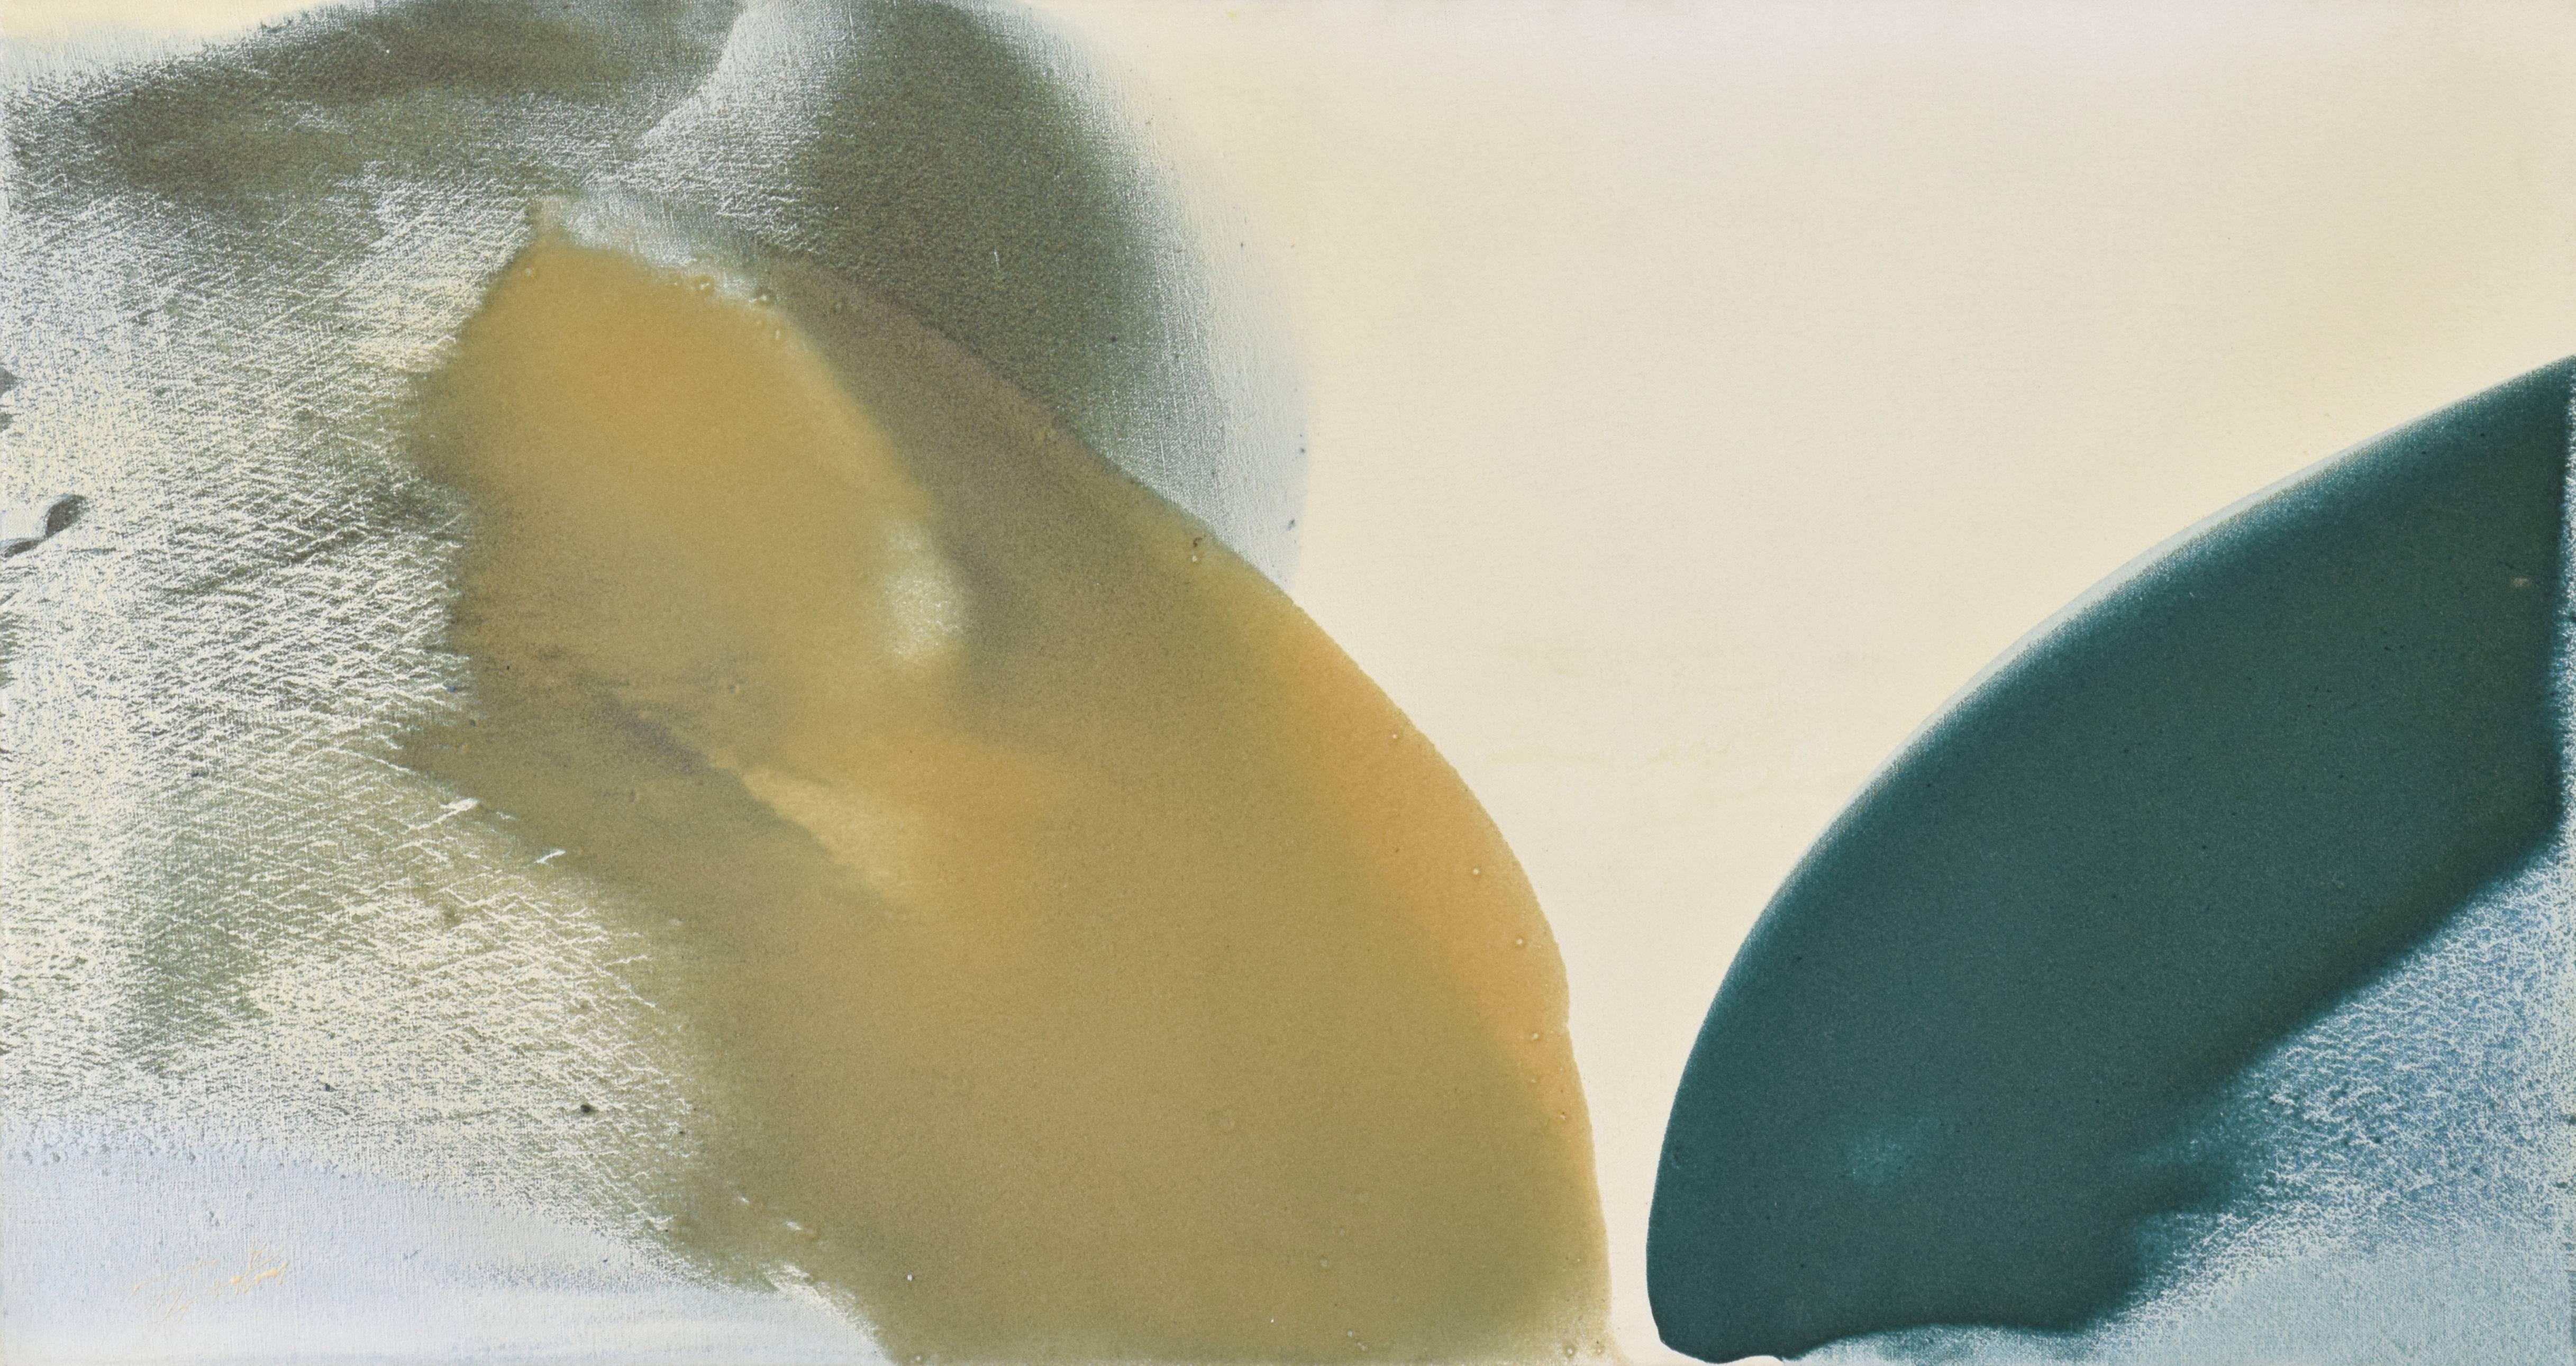 Phenomena Winter Hart by Paul Jenkins (1923-2012)
Oil and sand on canvas
66 x 122 cm (26 x 48 inches)
Signed, titled and dated on verso, Paul Jenkins “Phenomena Winter Harth” 1978

The paintings of Paul Jenkins have come to represent the spirit,